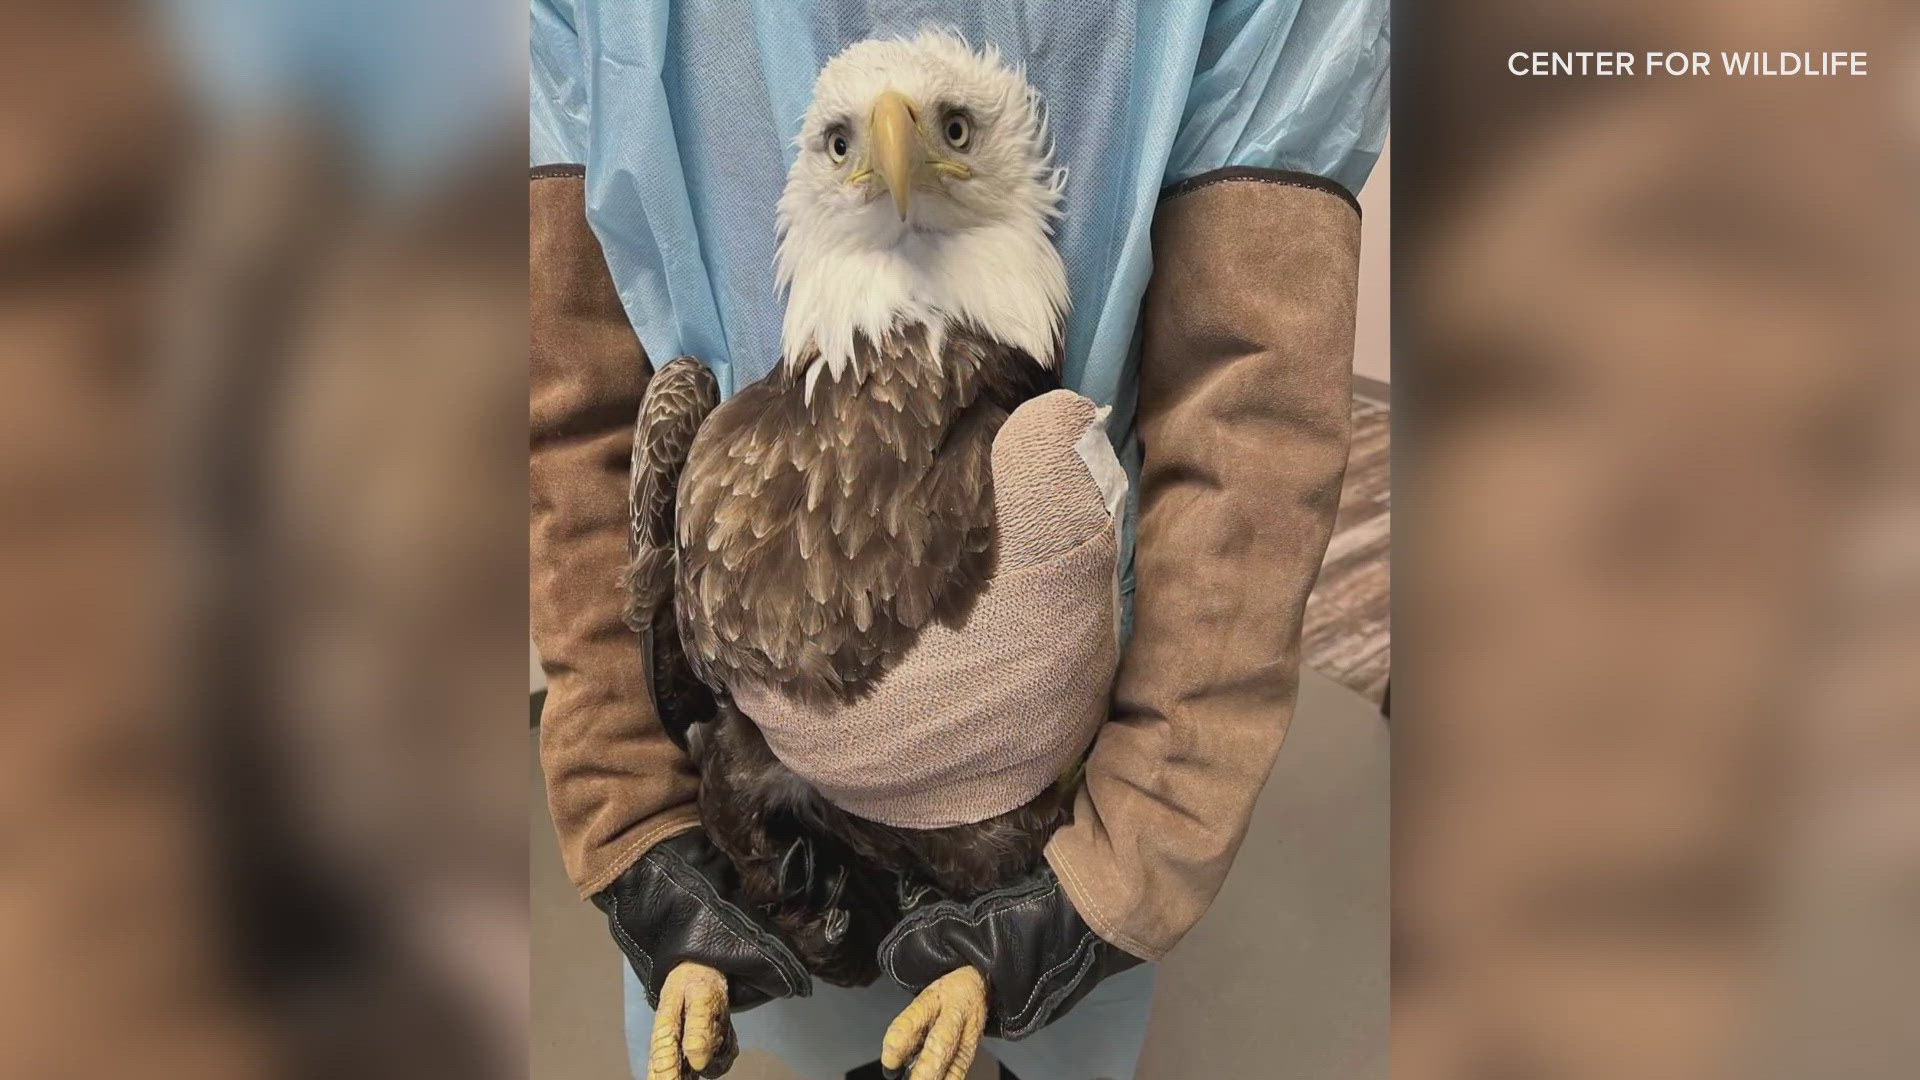 The Center for Wildlife in Cape Neddick performed surgery on the 5-year-old bird whose wing broke after being hit on the highway.